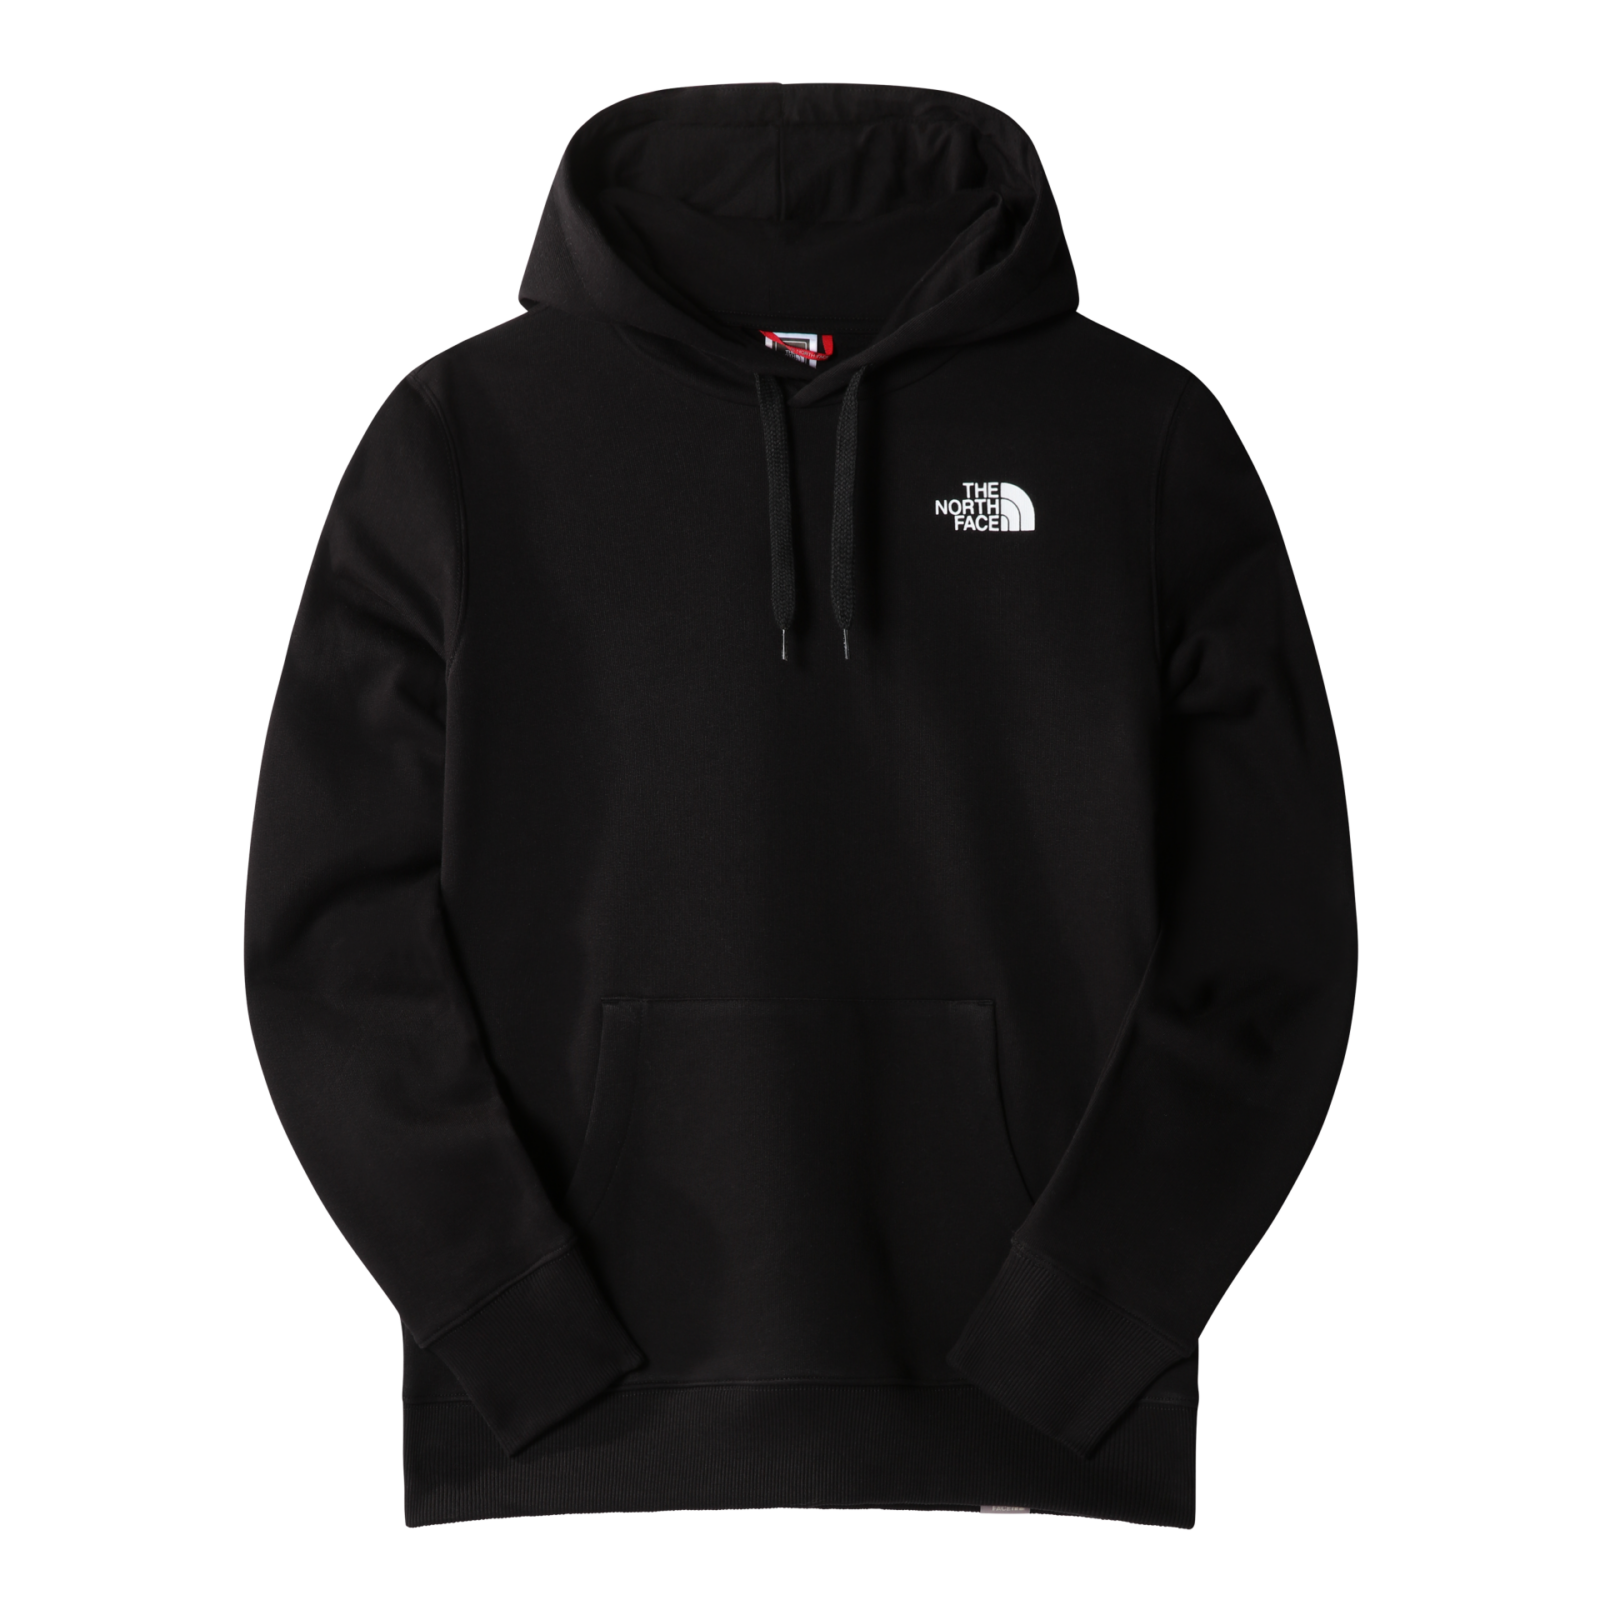 The North Face Woman's Hoodie